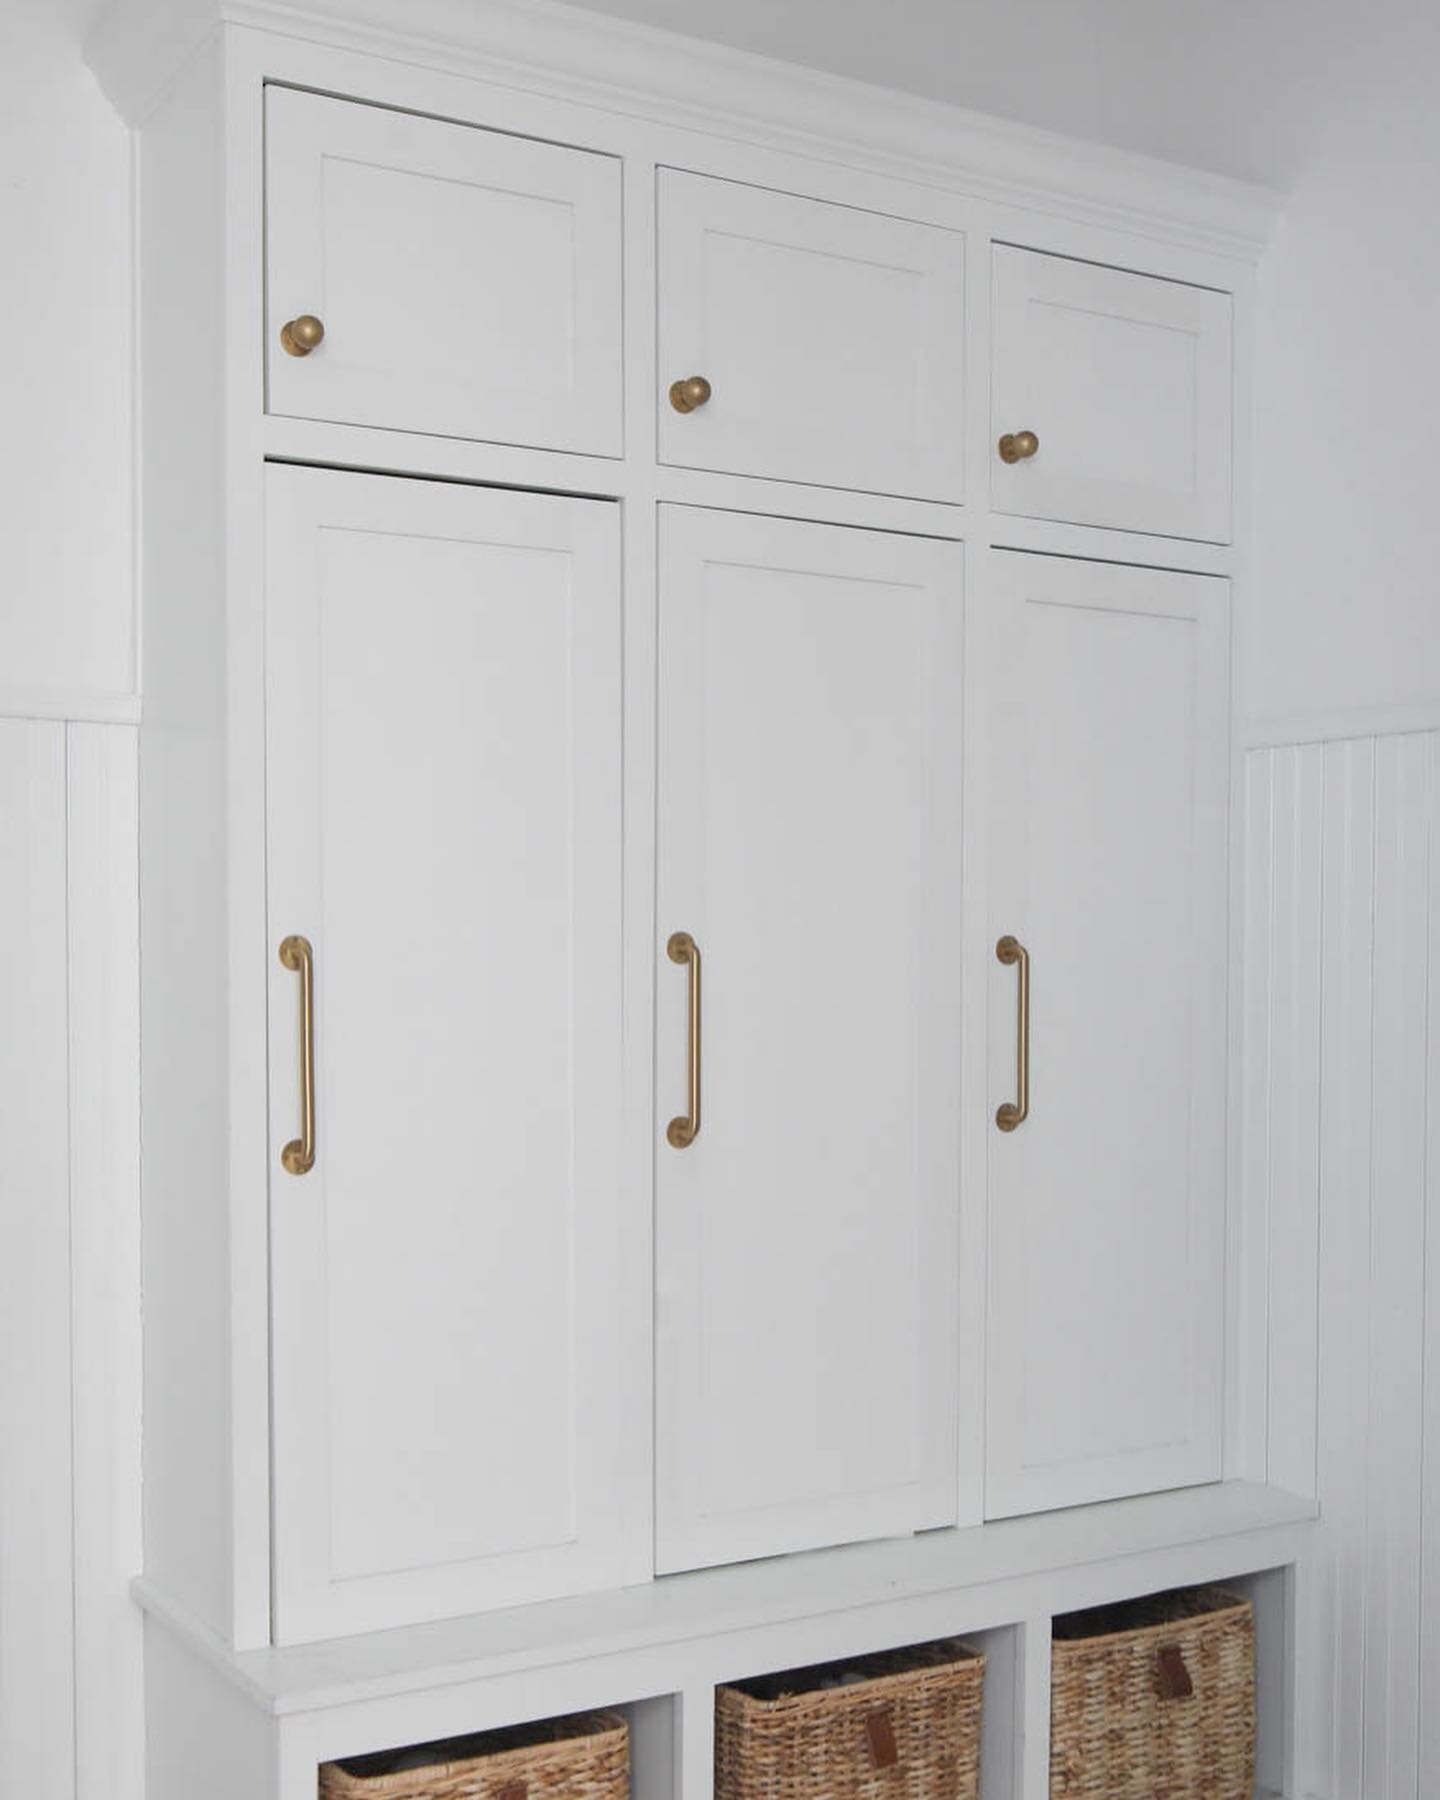 This mudroom got a facelift and added these custom built-ins. Swipe for the before!